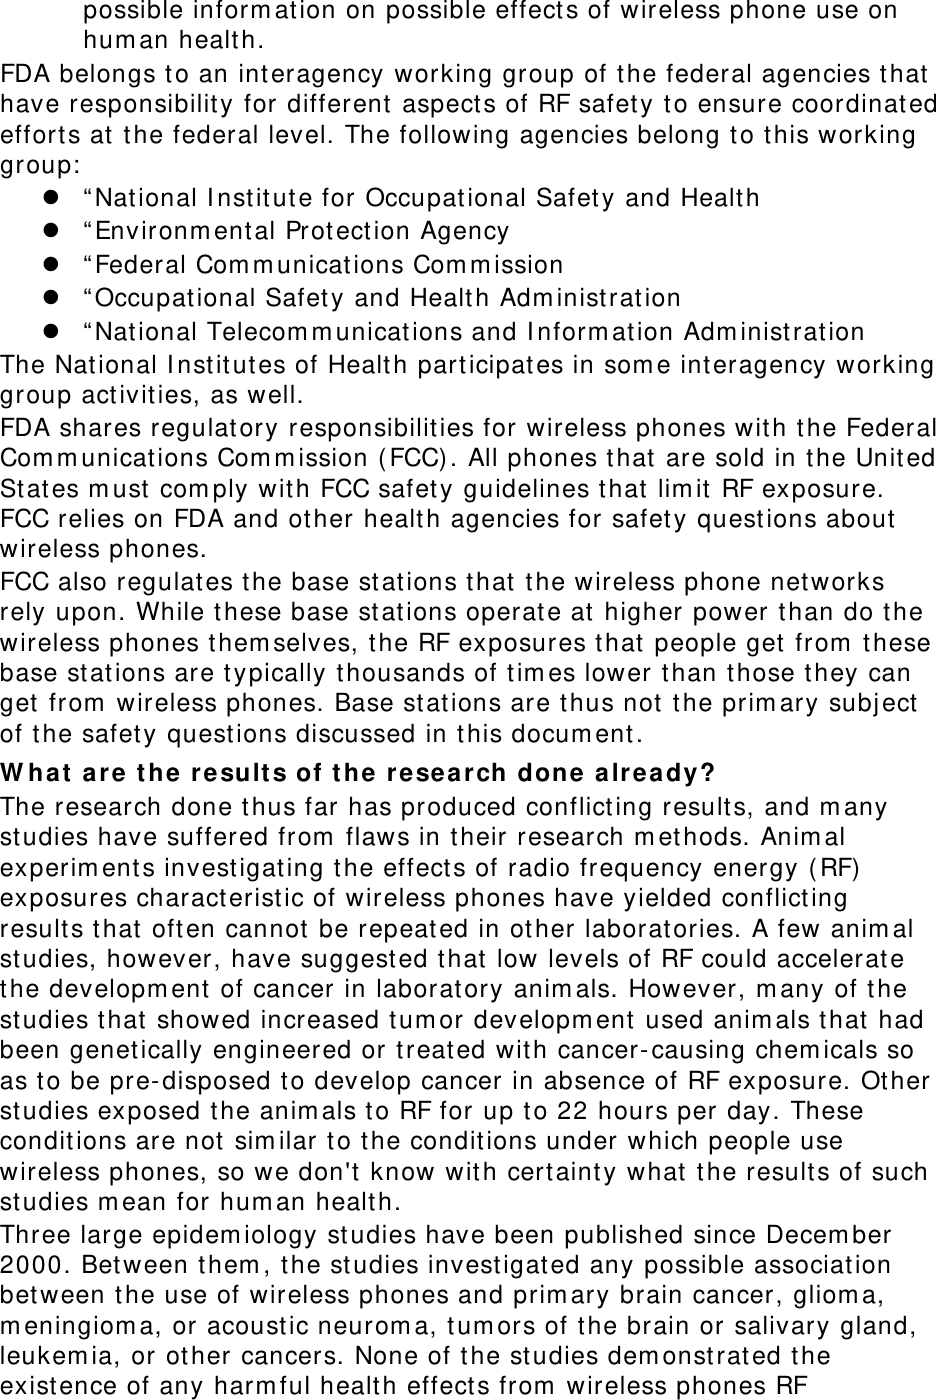 possible information on possible effects of wireless phone use on human health. FDA belongs to an interagency working group of the federal agencies that have responsibility for different aspects of RF safety to ensure coordinated efforts at the federal level. The following agencies belong to this working group:  “National Institute for Occupational Safety and Health  “Environmental Protection Agency  “Federal Communications Commission  “Occupational Safety and Health Administration  “National Telecommunications and Information Administration The National Institutes of Health participates in some interagency working group activities, as well. FDA shares regulatory responsibilities for wireless phones with the Federal Communications Commission (FCC). All phones that are sold in the United States must comply with FCC safety guidelines that limit RF exposure. FCC relies on FDA and other health agencies for safety questions about wireless phones. FCC also regulates the base stations that the wireless phone networks rely upon. While these base stations operate at higher power than do the wireless phones themselves, the RF exposures that people get from these base stations are typically thousands of times lower than those they can get from wireless phones. Base stations are thus not the primary subject of the safety questions discussed in this document. What are the results of the research done already? The research done thus far has produced conflicting results, and many studies have suffered from flaws in their research methods. Animal experiments investigating the effects of radio frequency energy (RF) exposures characteristic of wireless phones have yielded conflicting results that often cannot be repeated in other laboratories. A few animal studies, however, have suggested that low levels of RF could accelerate the development of cancer in laboratory animals. However, many of the studies that showed increased tumor development used animals that had been genetically engineered or treated with cancer-causing chemicals so as to be pre-disposed to develop cancer in absence of RF exposure. Other studies exposed the animals to RF for up to 22 hours per day. These conditions are not similar to the conditions under which people use wireless phones, so we don&apos;t know with certainty what the results of such studies mean for human health. Three large epidemiology studies have been published since December 2000. Between them, the studies investigated any possible association between the use of wireless phones and primary brain cancer, glioma, meningioma, or acoustic neuroma, tumors of the brain or salivary gland, leukemia, or other cancers. None of the studies demonstrated the existence of any harmful health effects from wireless phones RF 